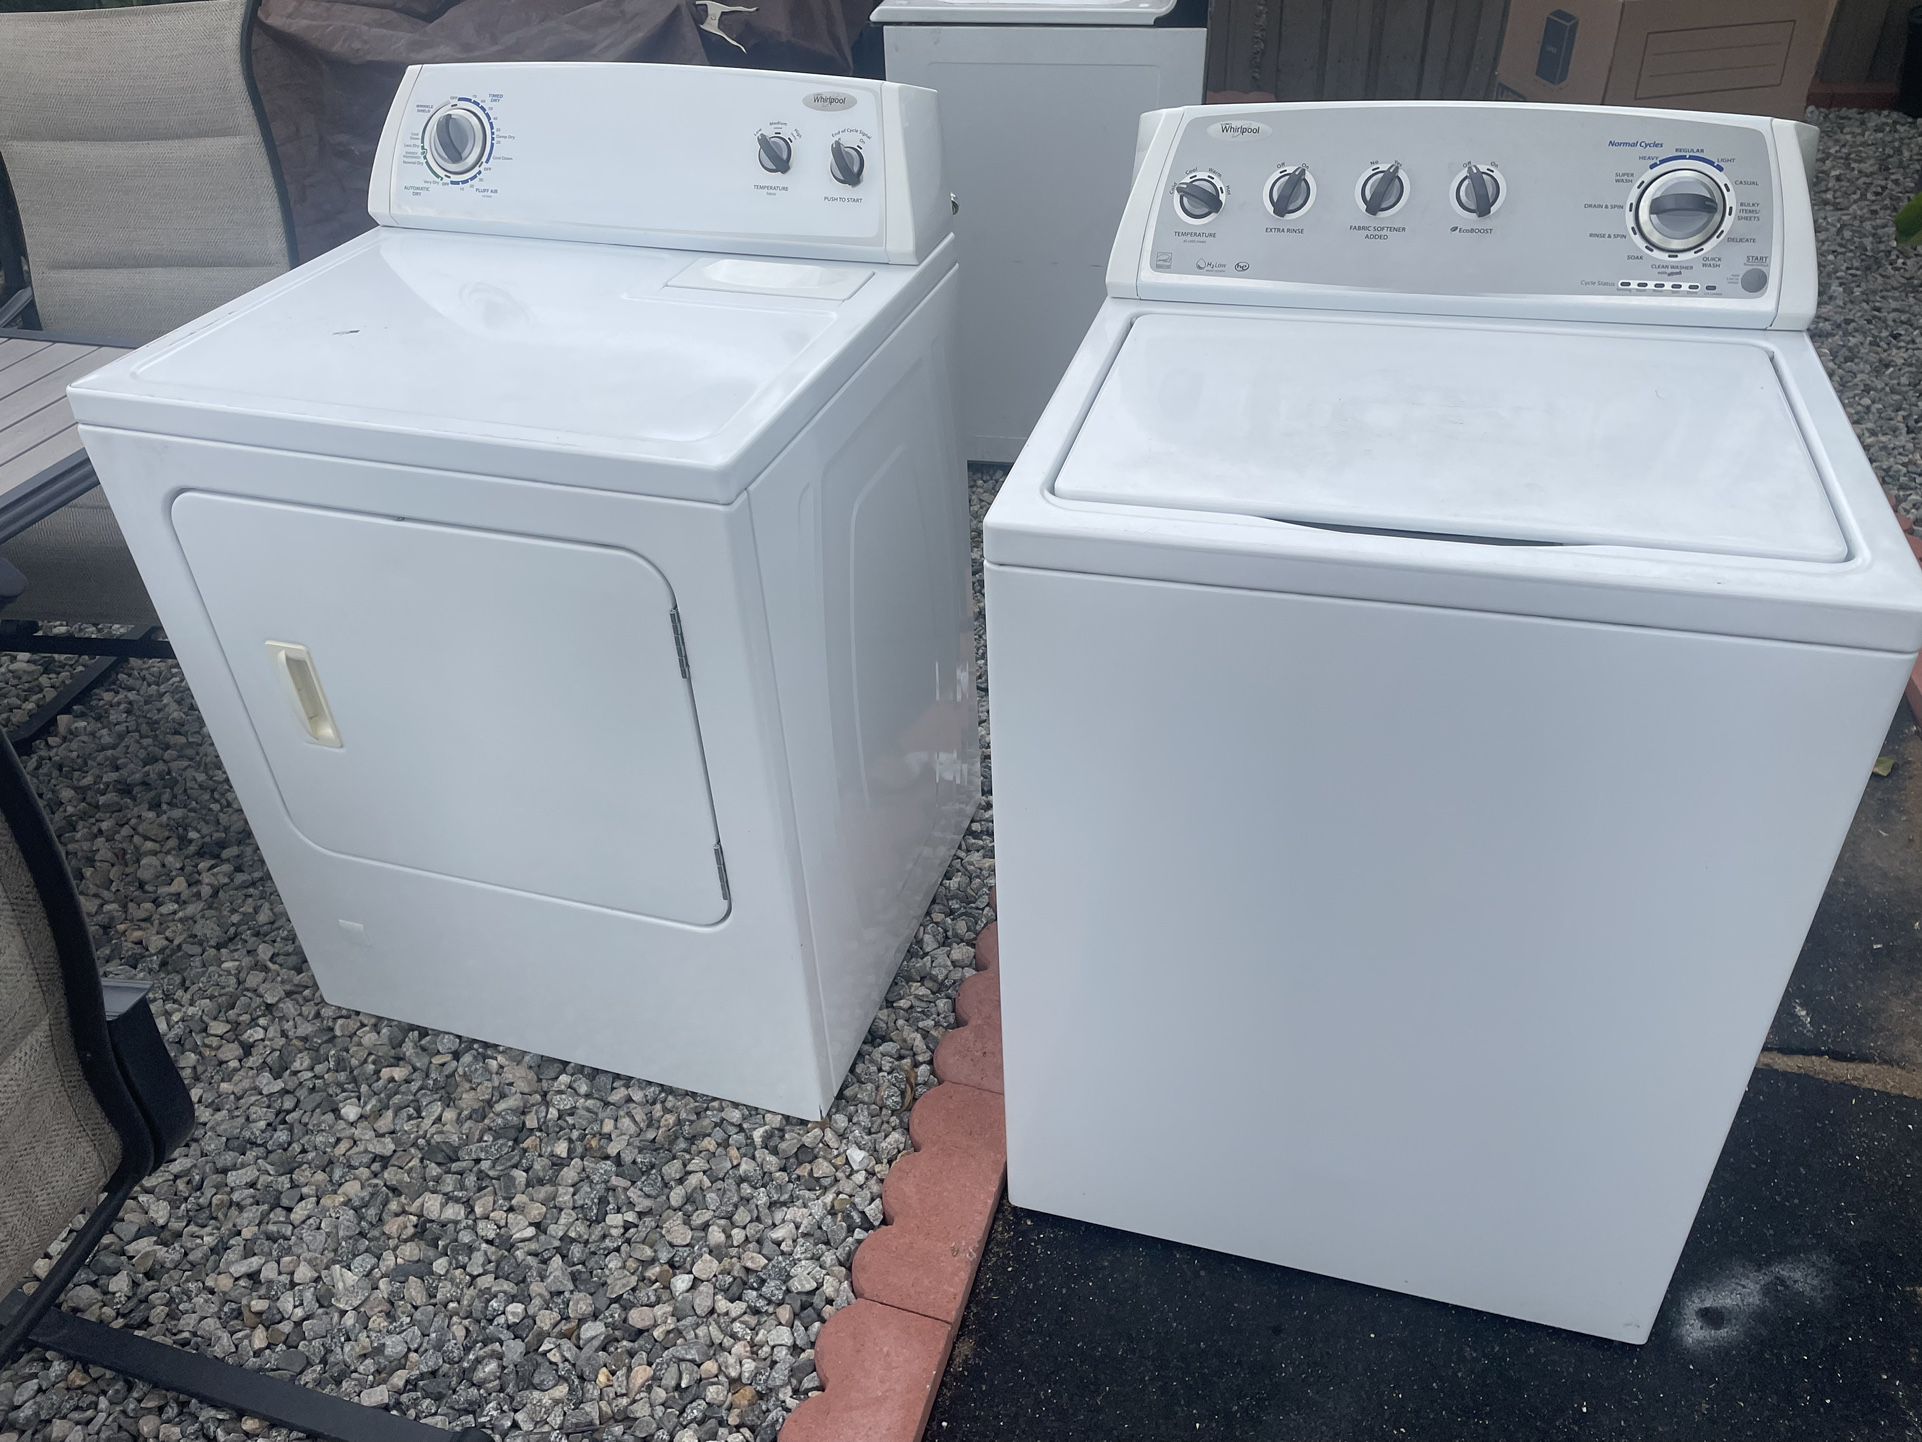 Whirlpool Washer And Gas Dryer 